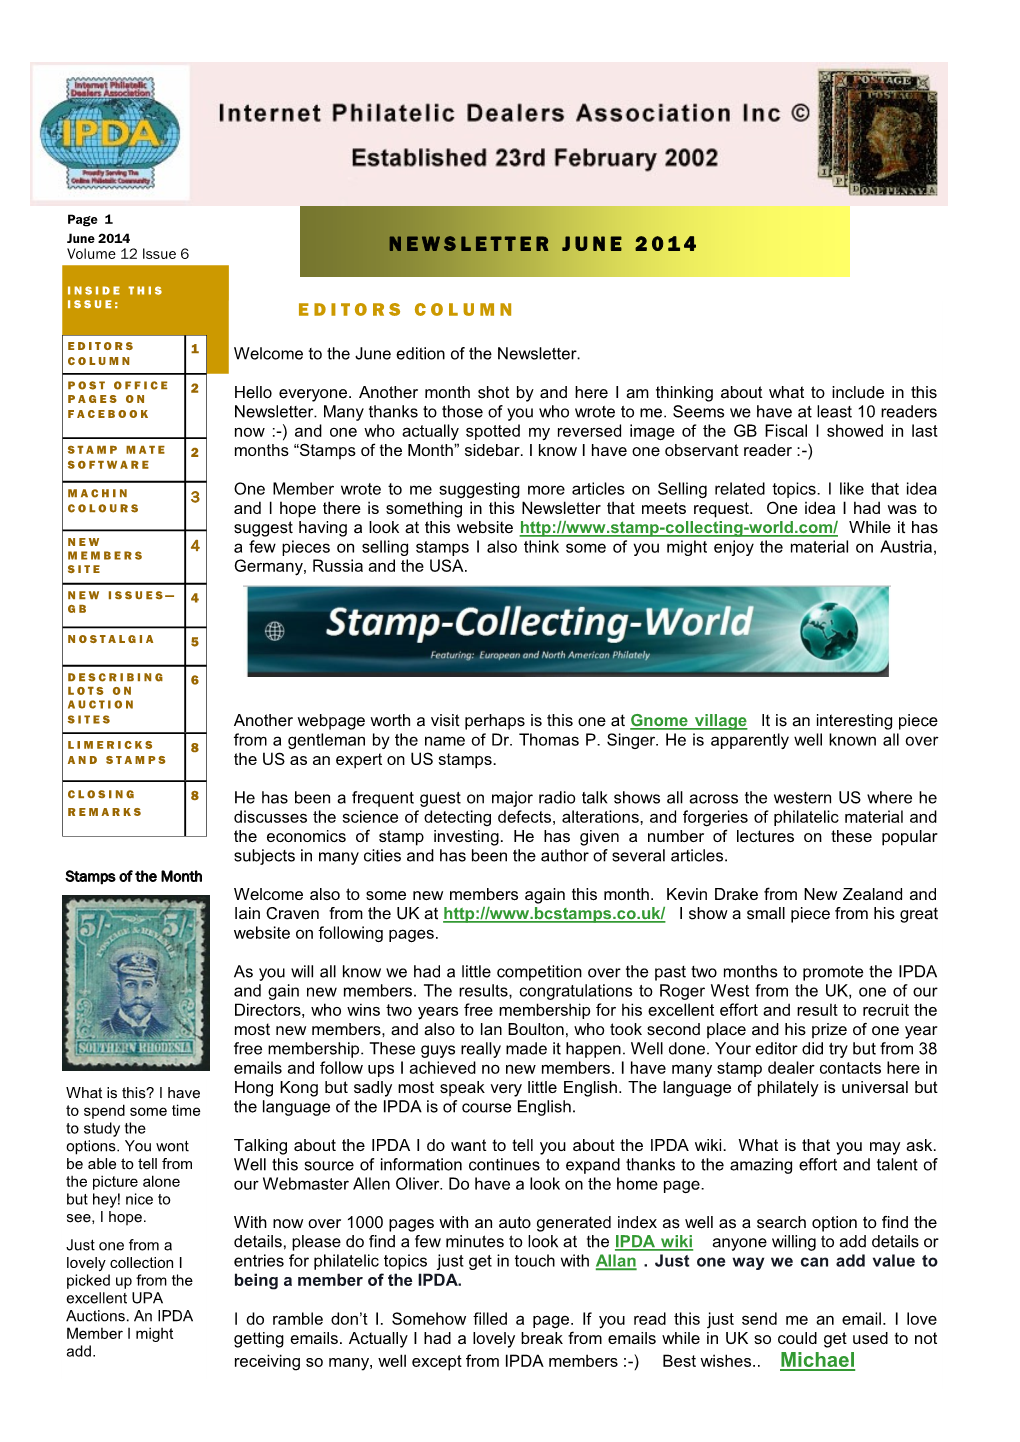 Michael Page 2 June 2014 NEWSLETTER JUNE 2014 Volume 12 Issue 6